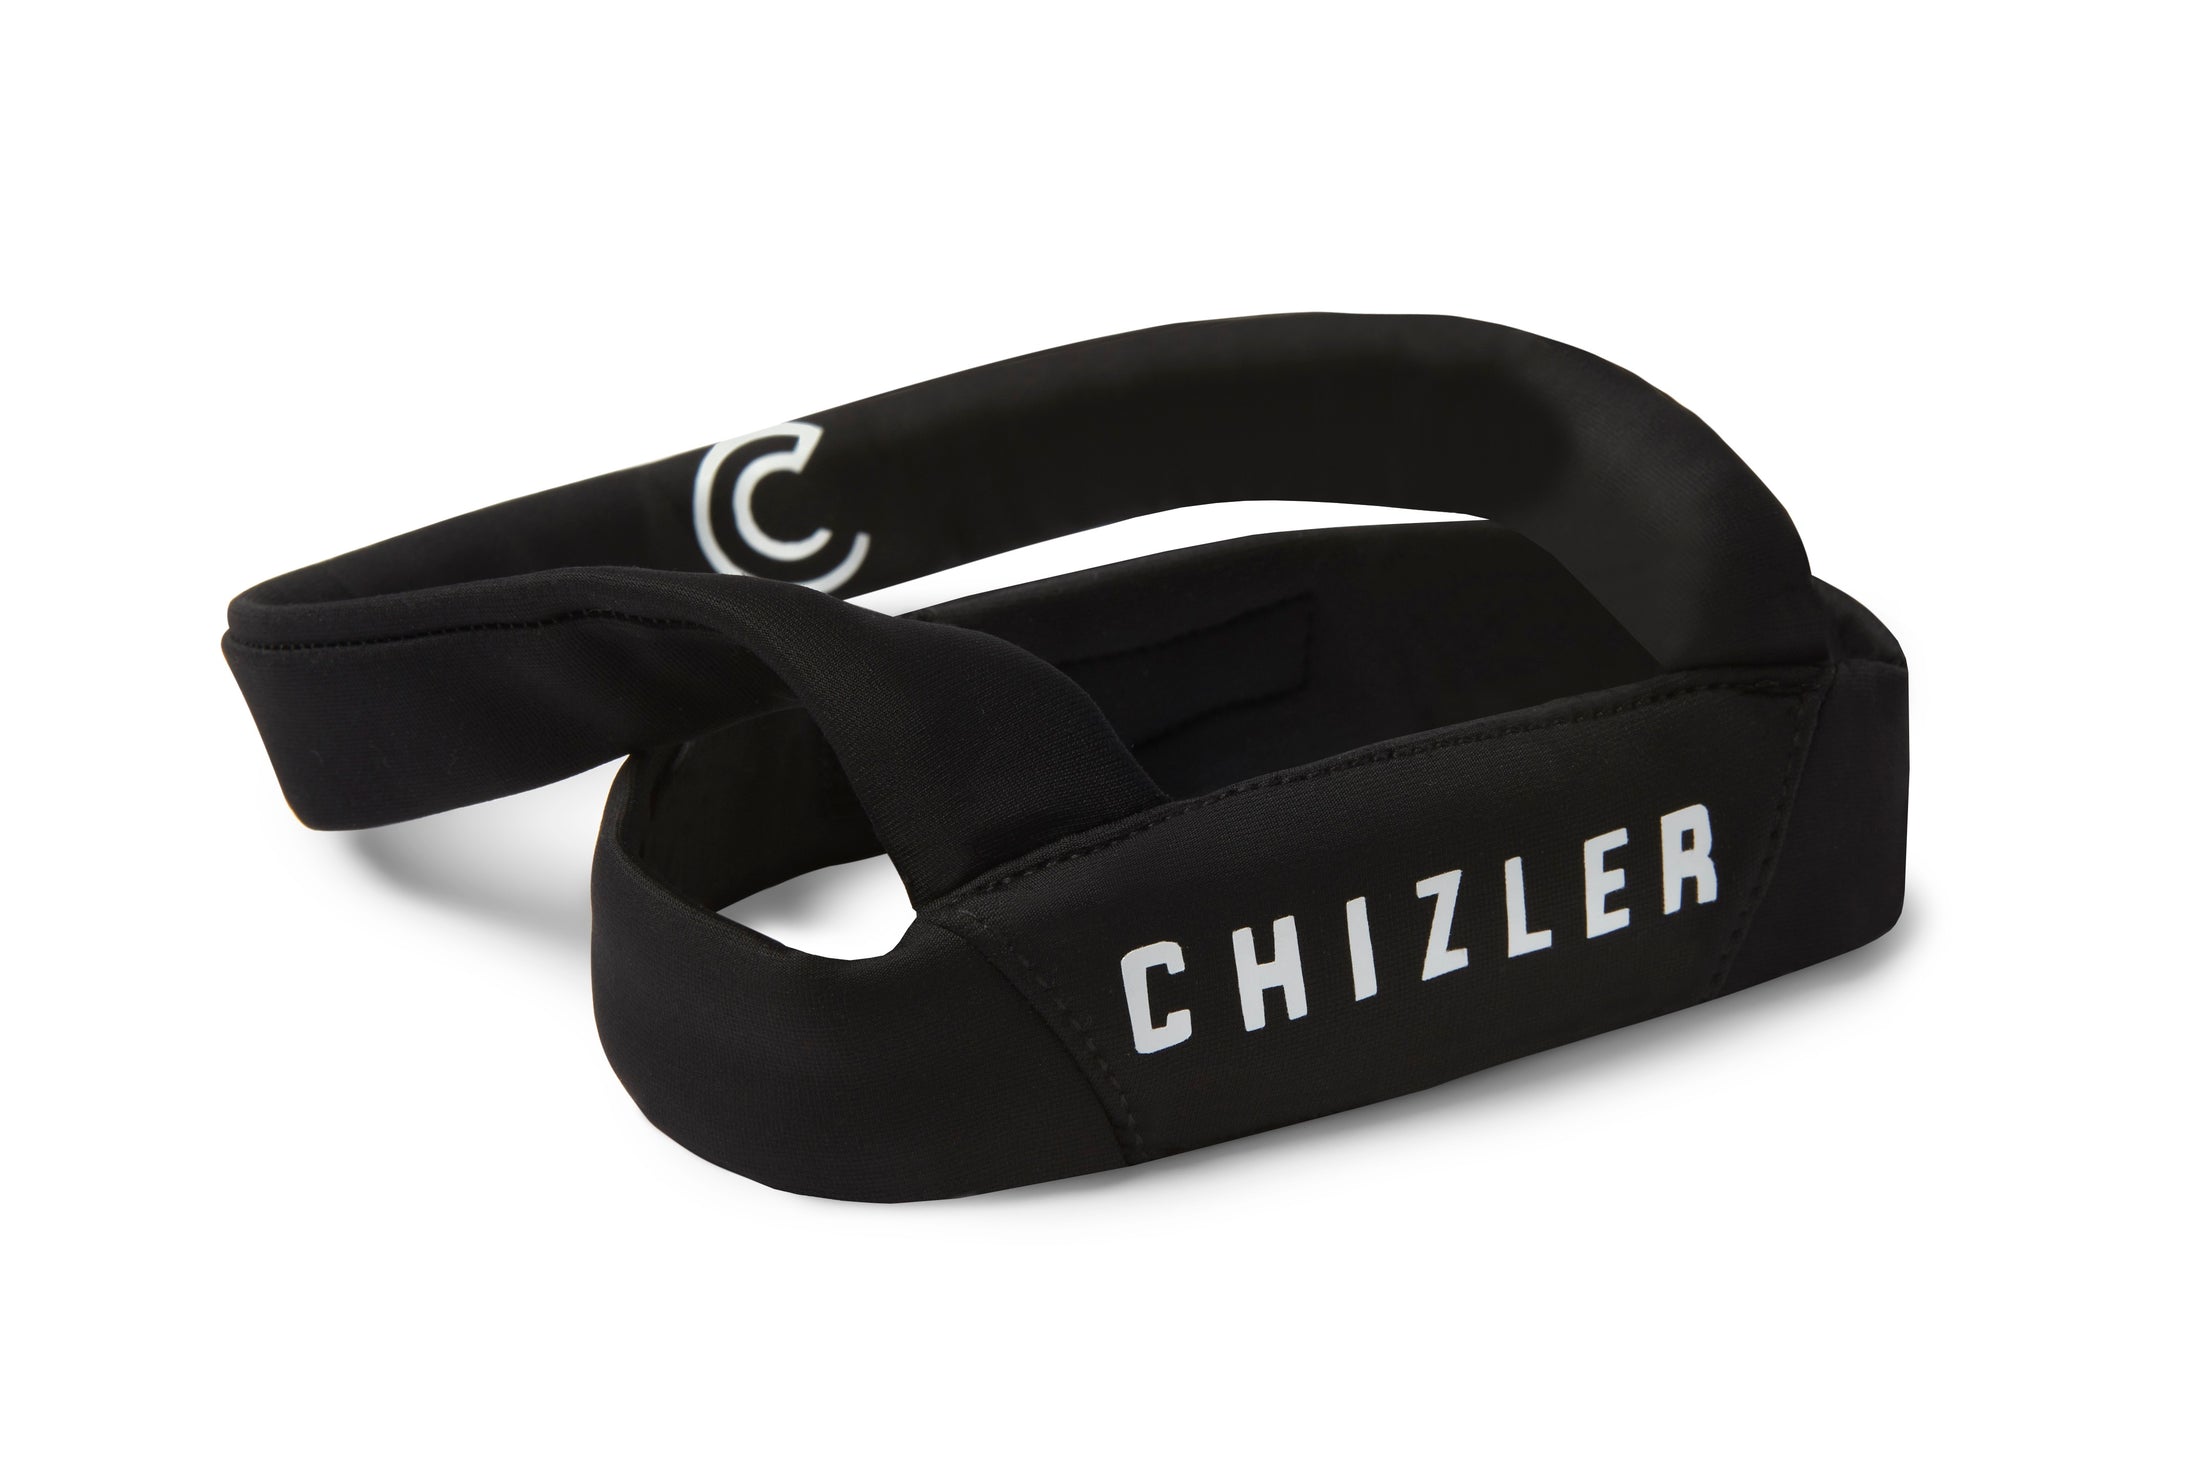 Chin Chizler, Resistance bands, take away double chin, Enhance beauty, Neck tightening, Face fat, remove sagging neck, Workout Gear, Double Chin, enhance Jawline, Strengthen Jaw, Face workout, tmj, Remove Crow's feet, skin health, youthful appearance, face lift, Facial fitness, face exercise , Remove Turkey Neck, Beauty product, Remove Double chin, Jaw Workouts, sharpen Jawline,  Kybella, Botox, Jawzrsize, Coolsculpting, Chin Reducer, Cosmetic, Face Yoga, Injectable Fillers, Juvederm, Voluma